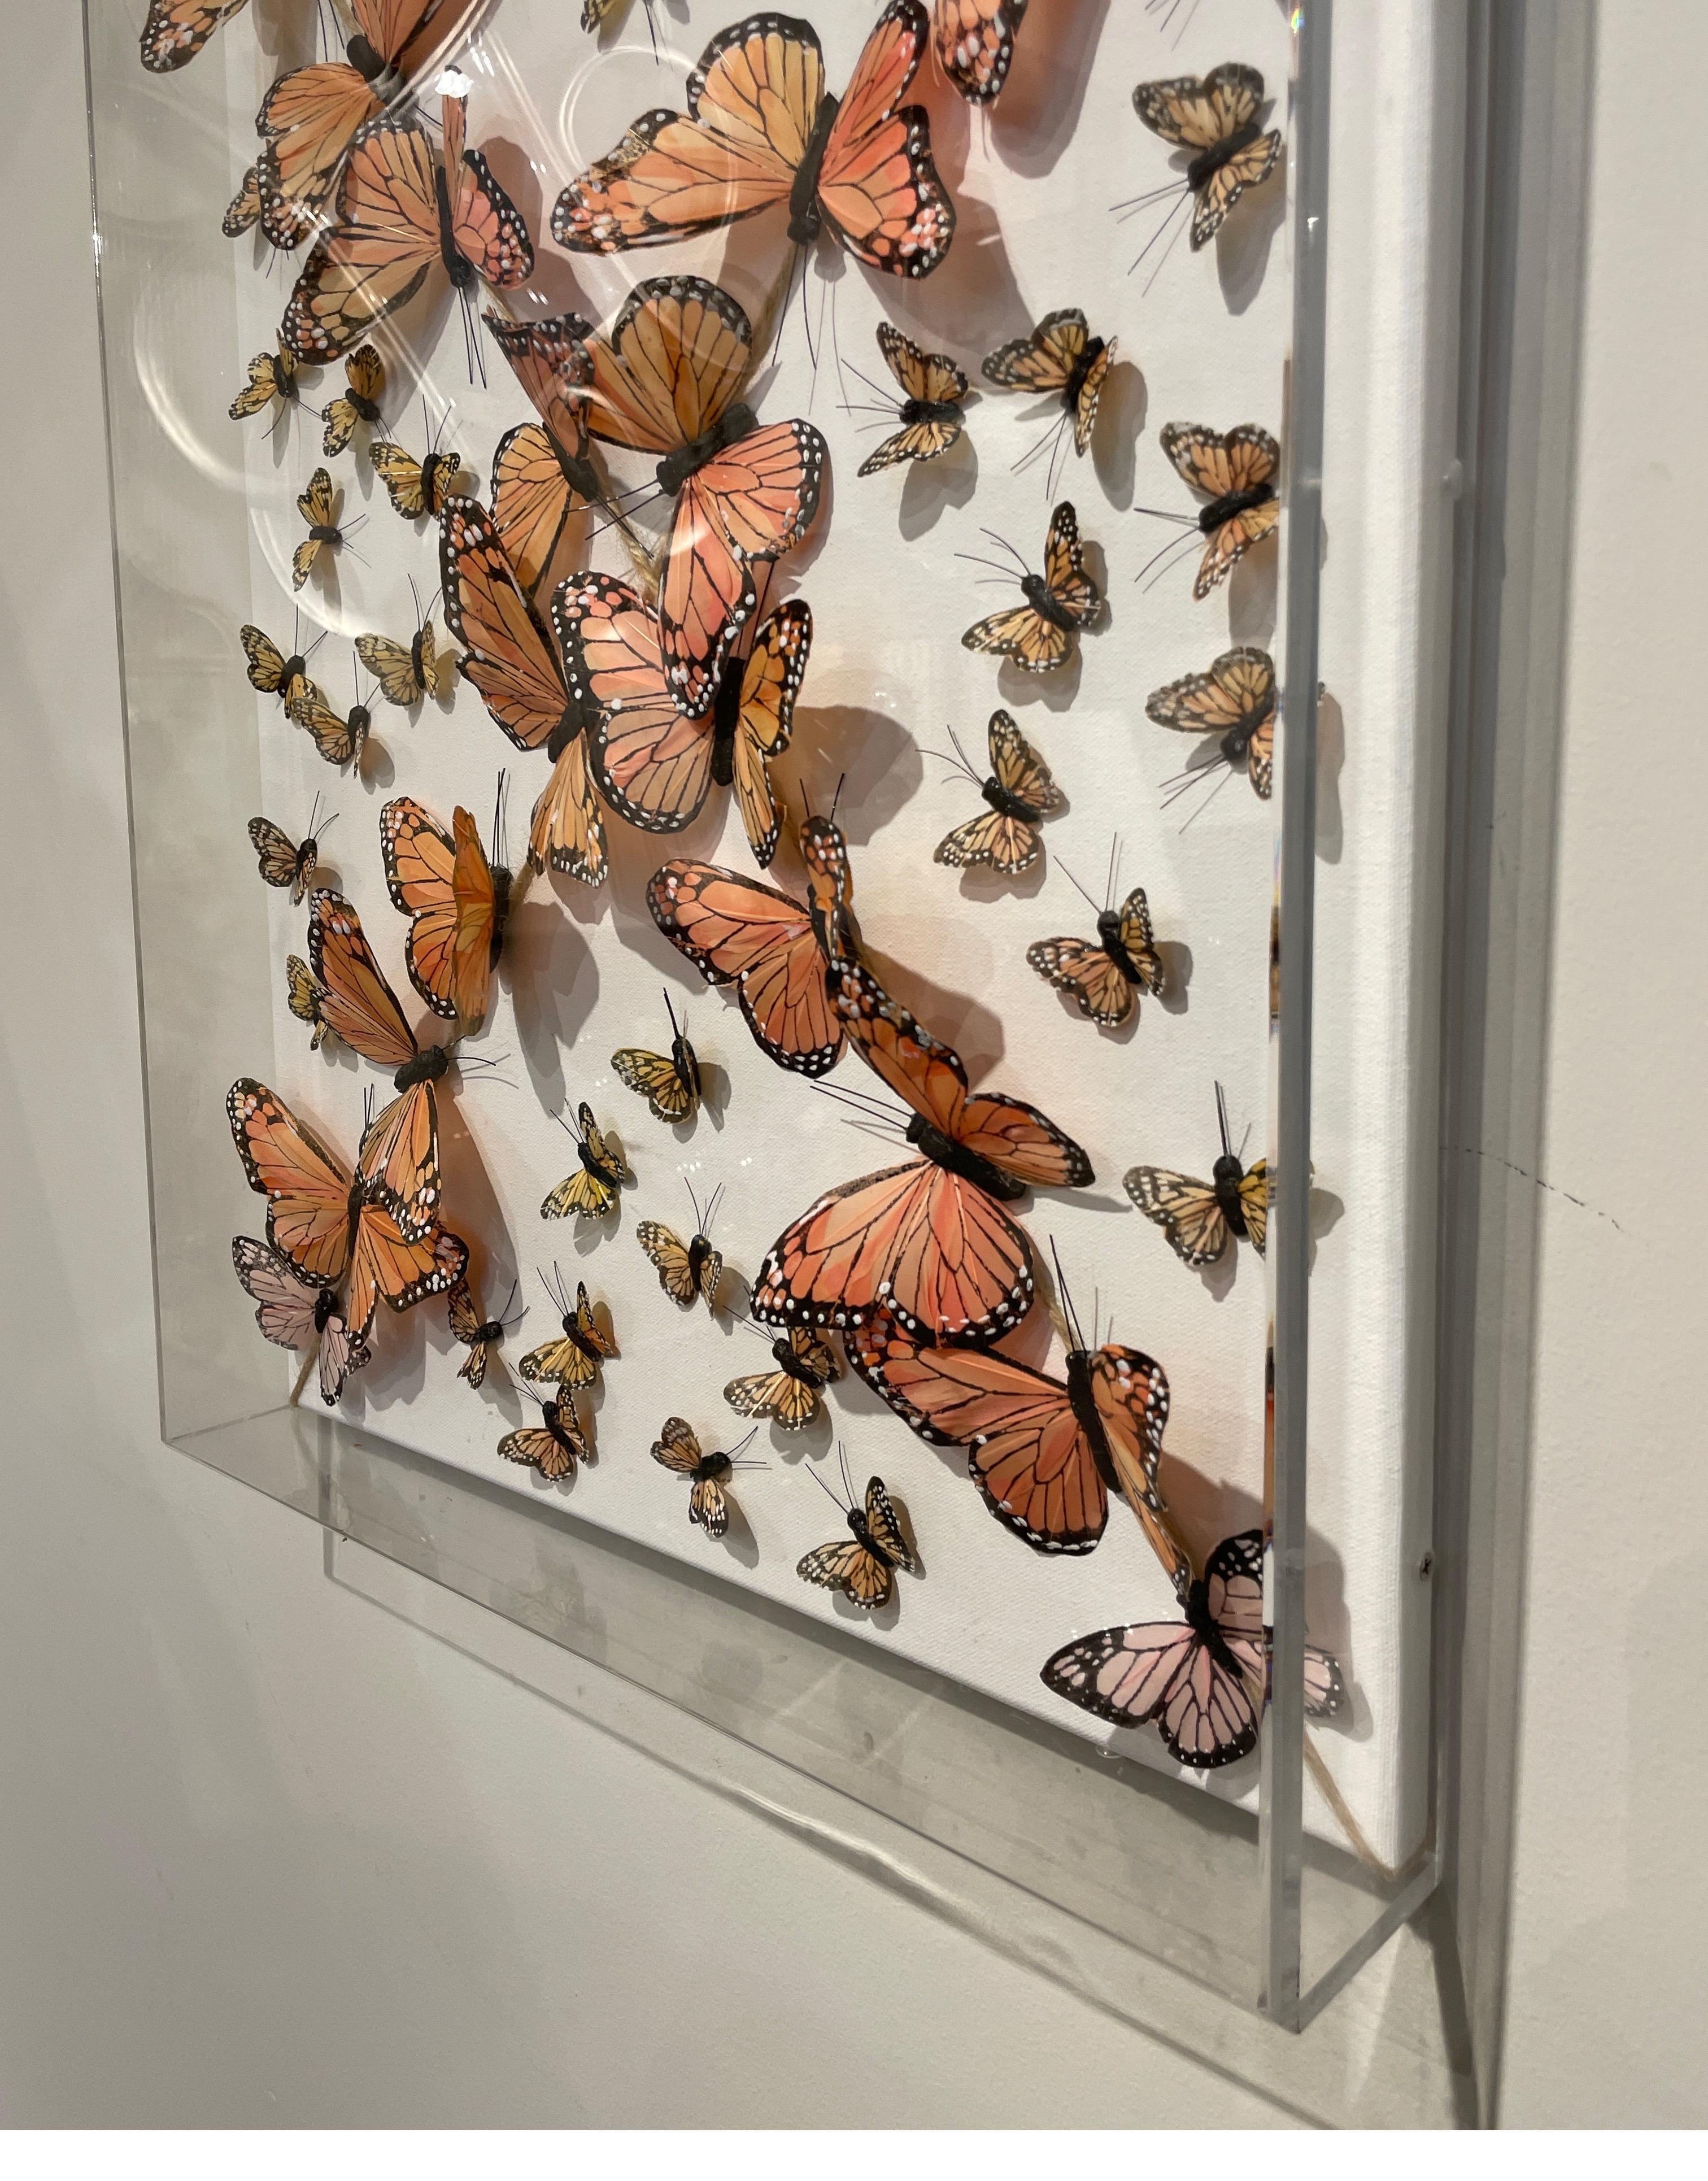 Original butterfly art depicting different sizes of Monarch butterflies in a lucite shadow box by Nadine Kalachnikoff.